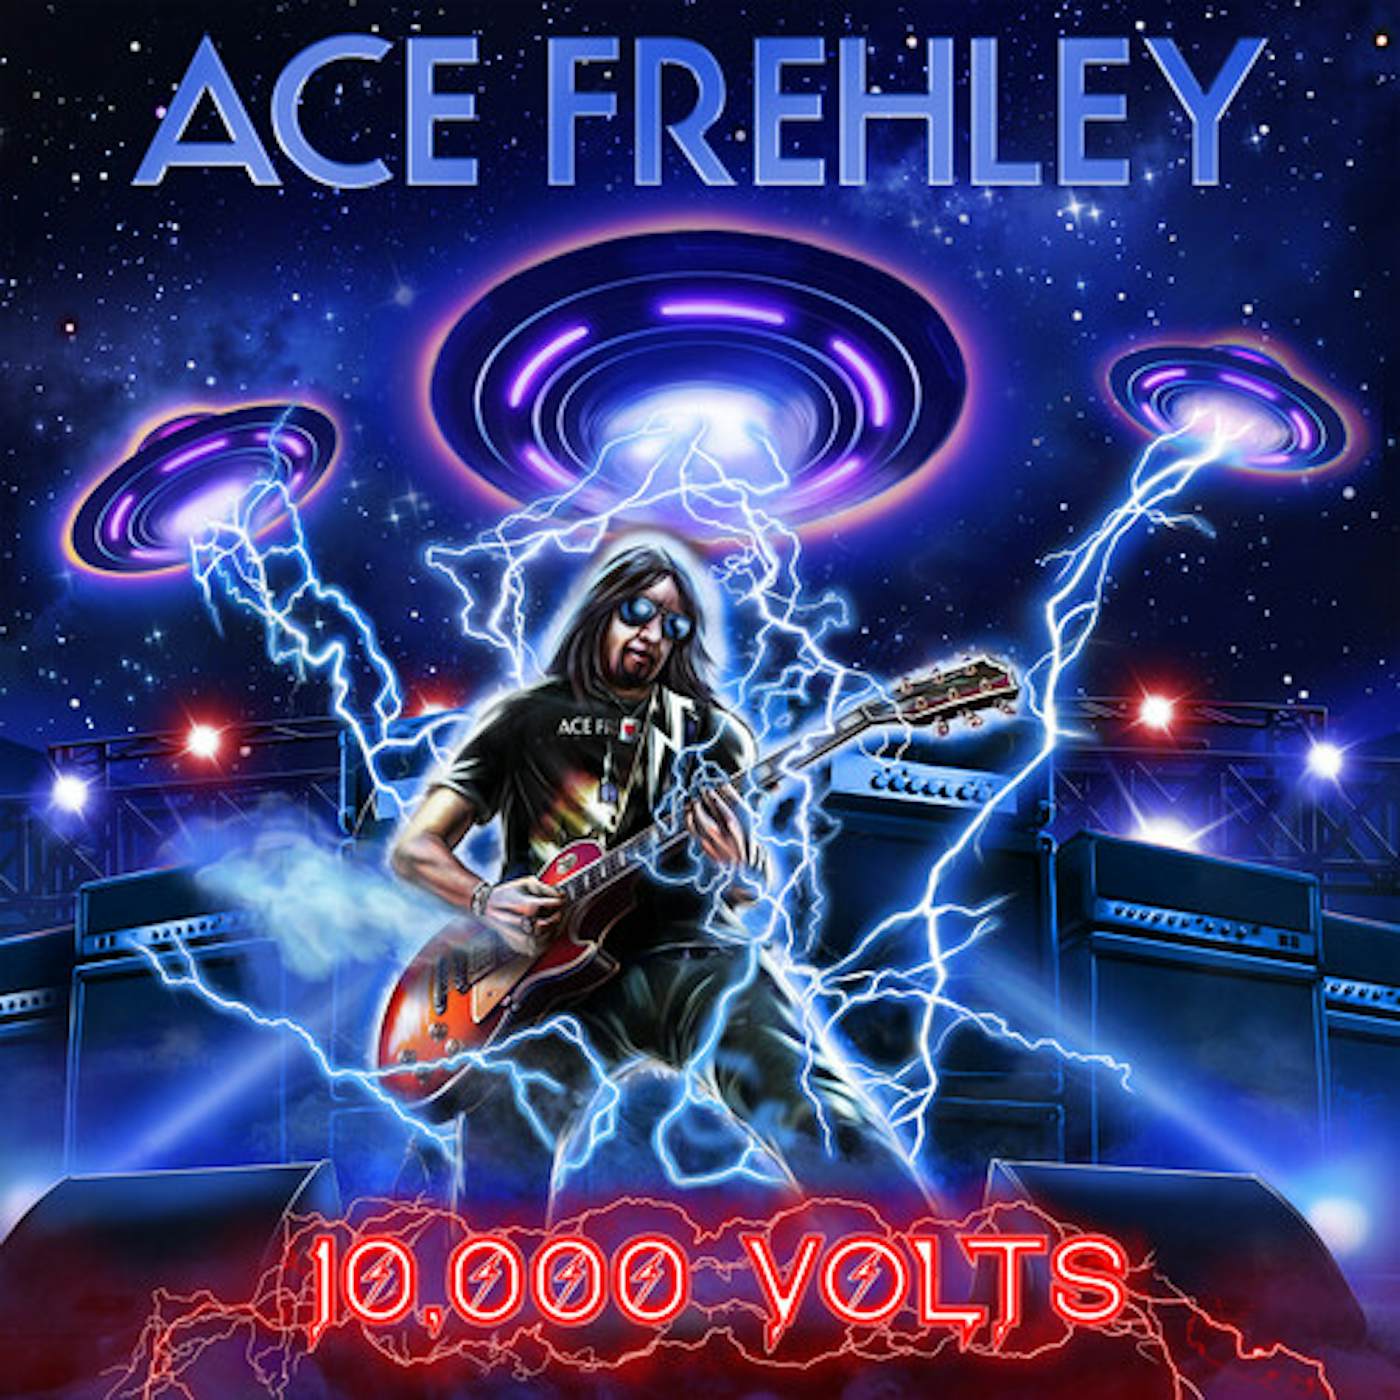 Ace Frehley 10000 VOLTS - COLOR IN COLOR Vinyl Record